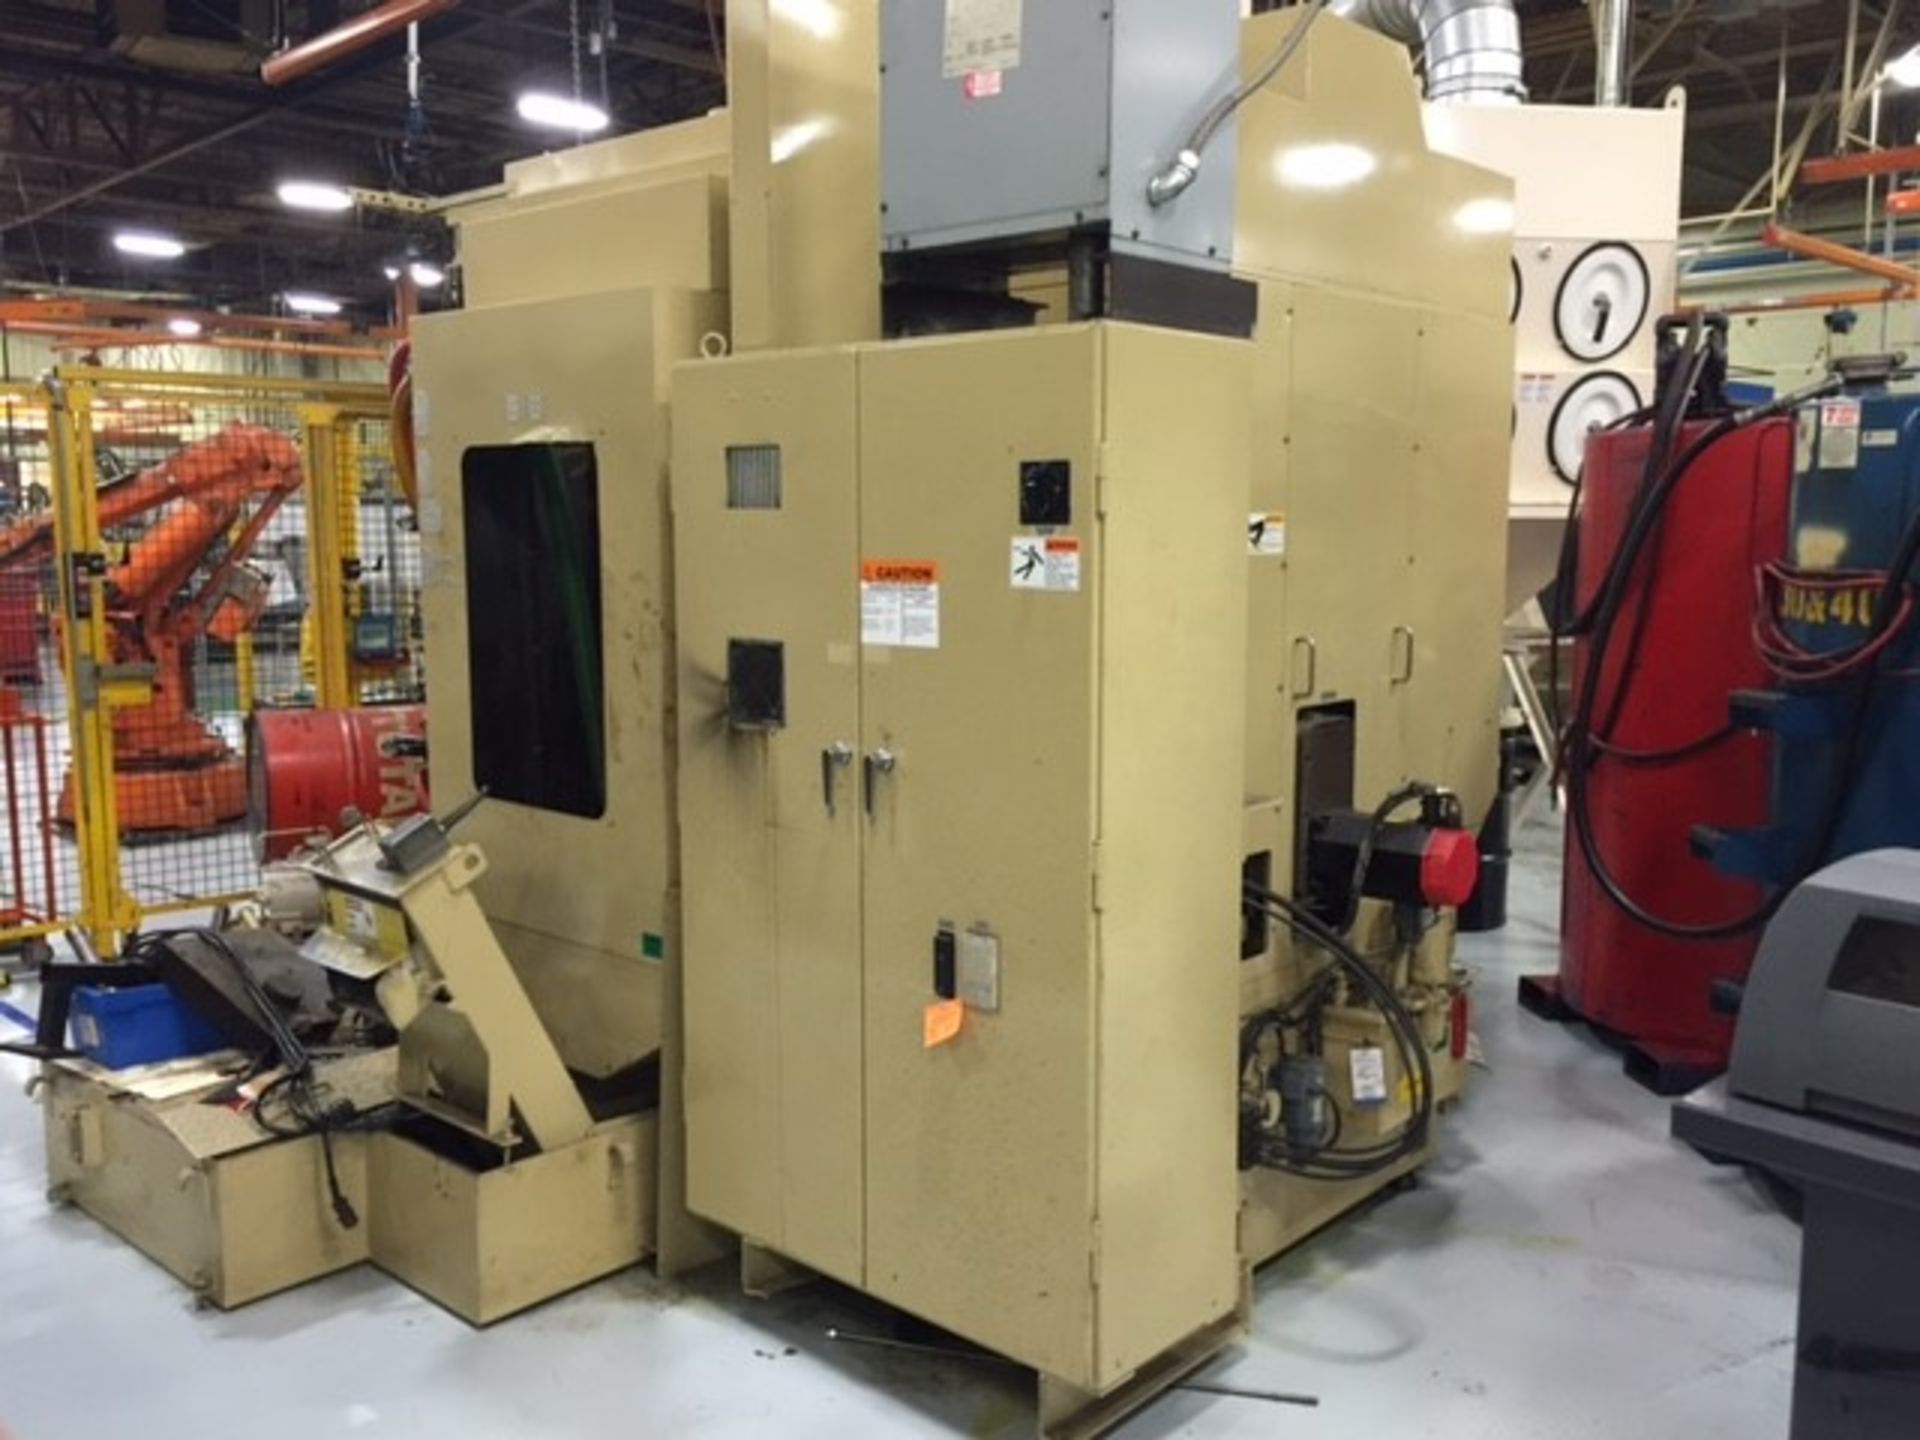 MITSUBISHI GD30 12" CNC GEAR HOBBER, FANUC 18 MB CONTROL, YEAR 1999, LOCATION MI, BUY TO LOAD & SHIP - Image 2 of 2